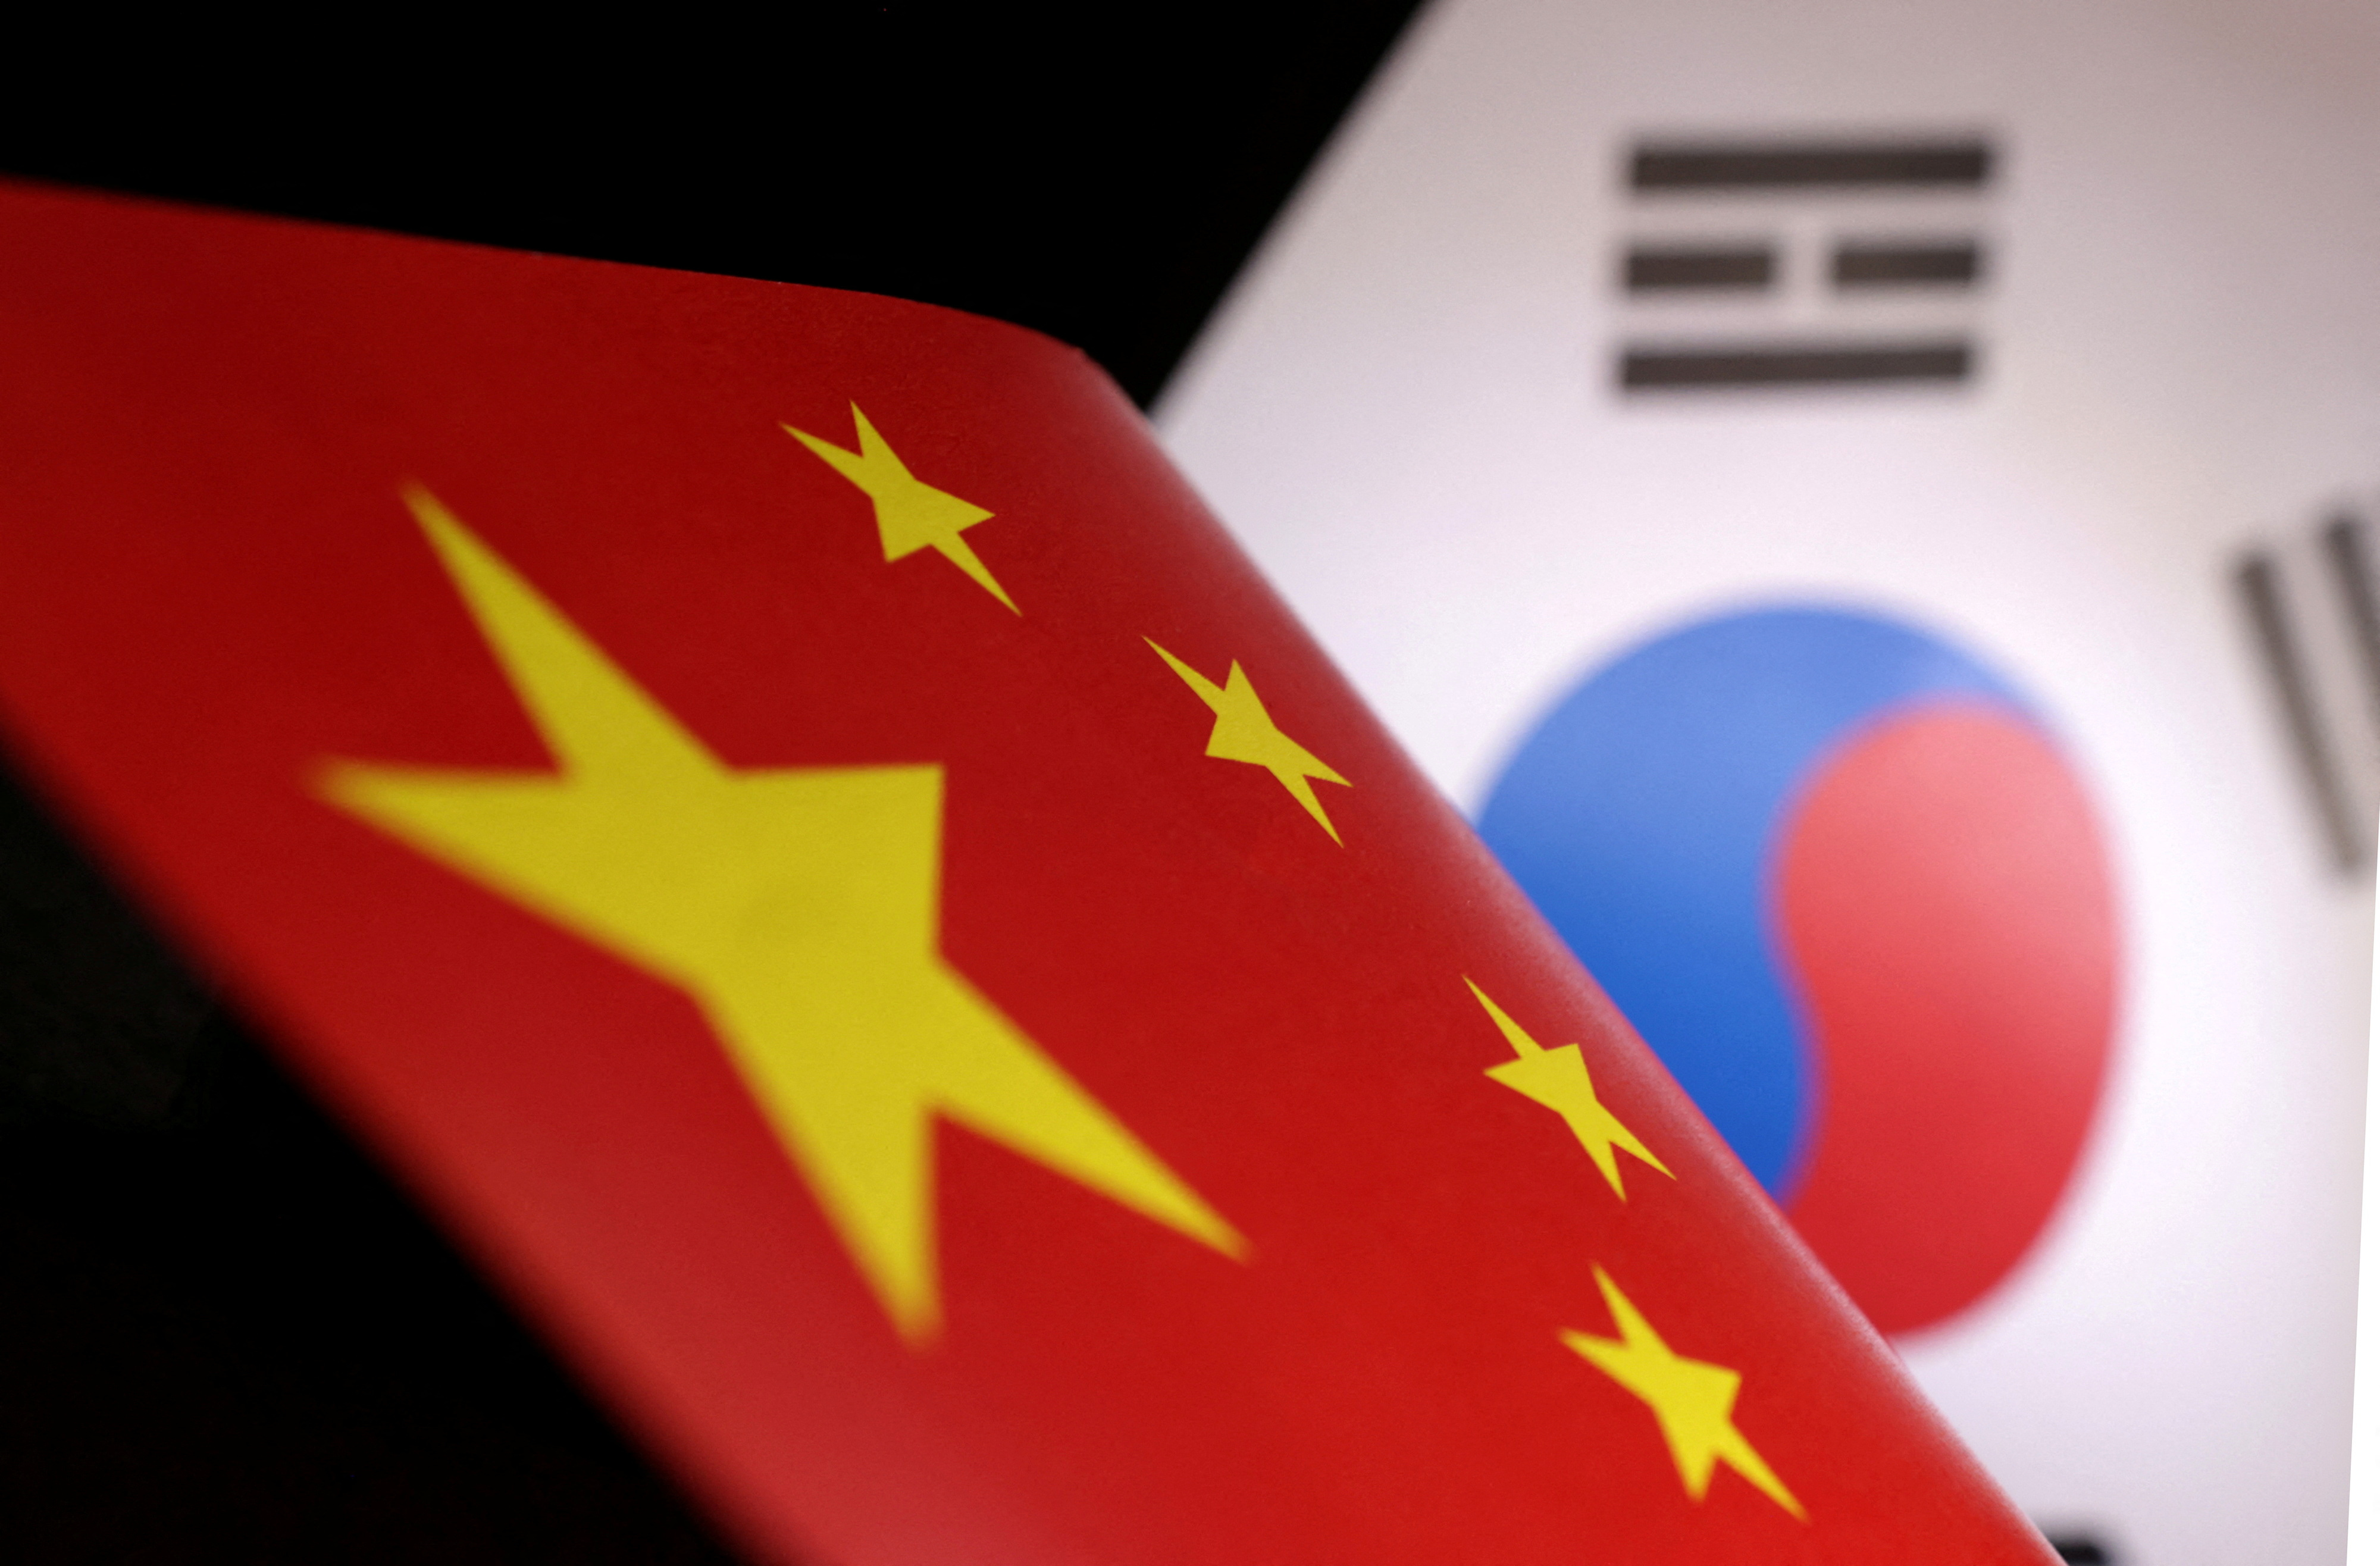 Illustration shows printed Chinese and South Korean flags